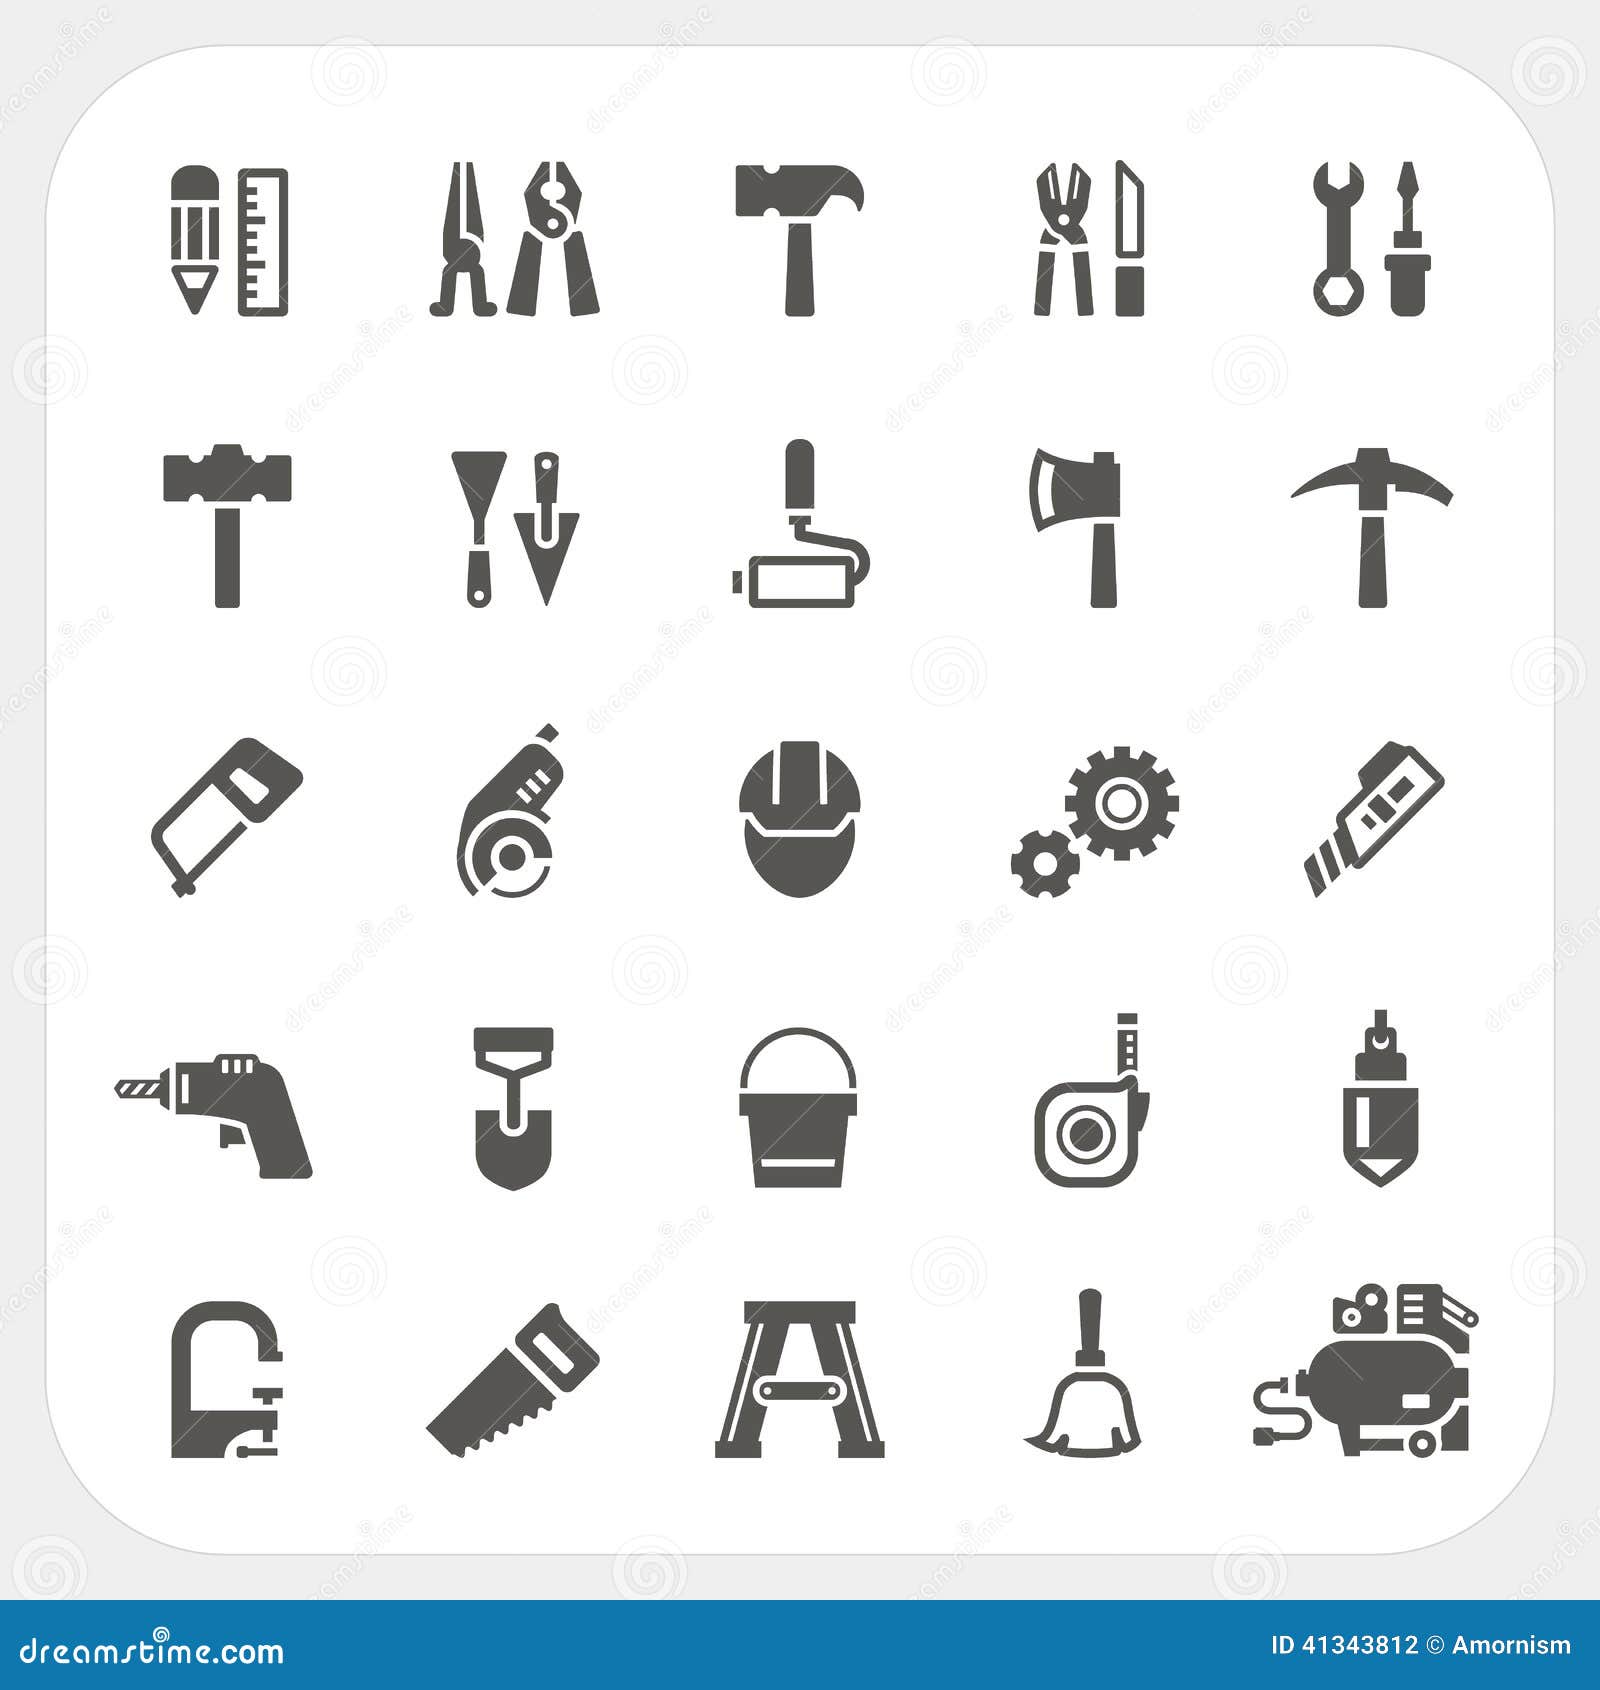 construction tool icons set